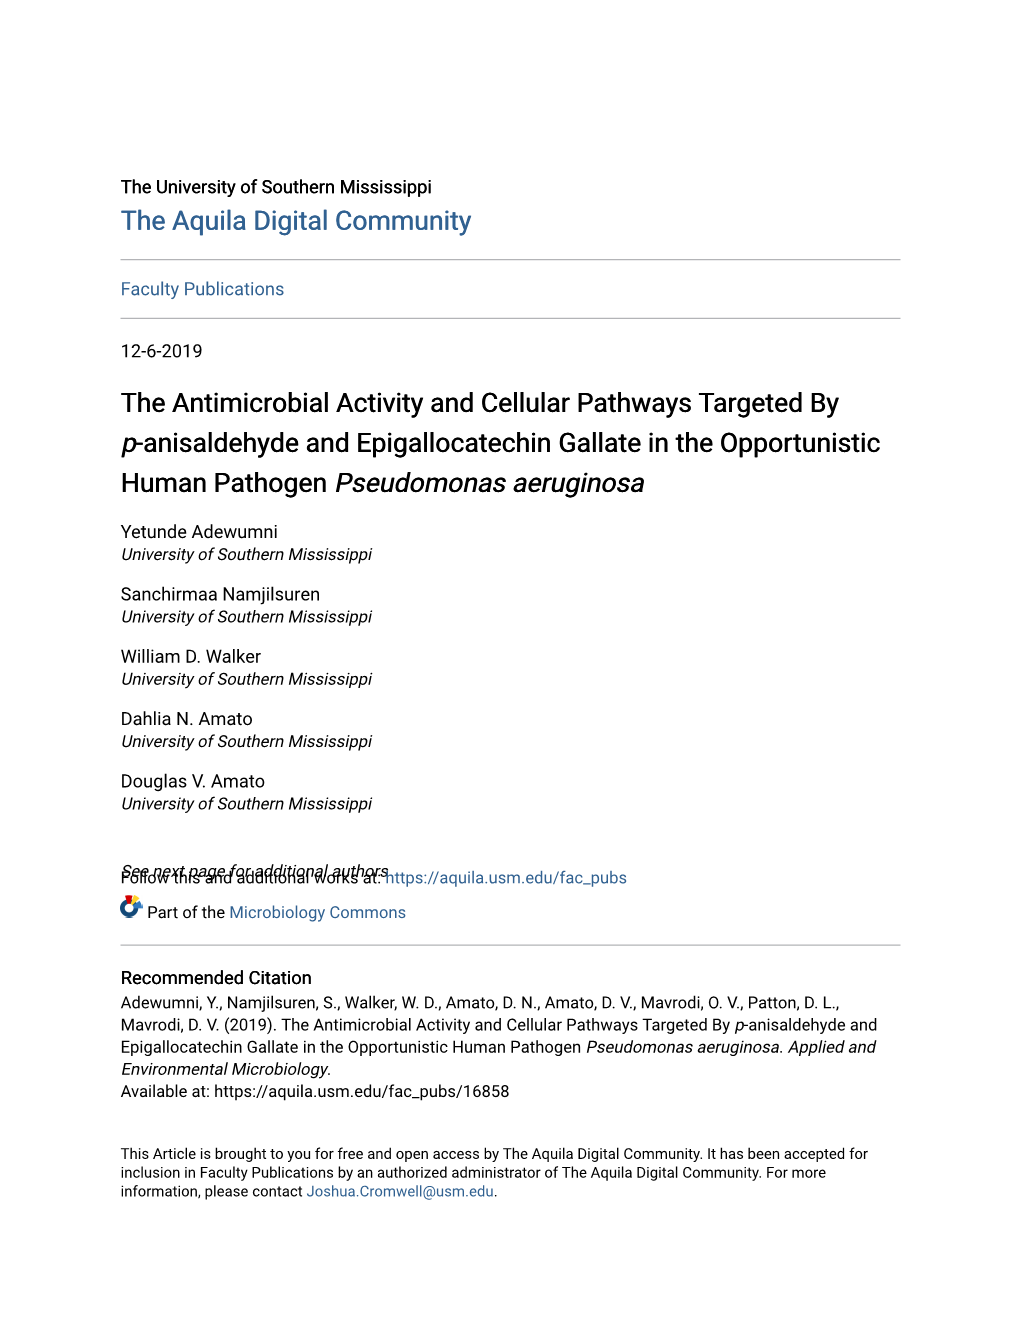 The Antimicrobial Activity and Cellular Pathways Targeted by P-Anisaldehyde and Epigallocatechin Gallate in the Opportunistic Human Pathogen Pseudomonas Aeruginosa